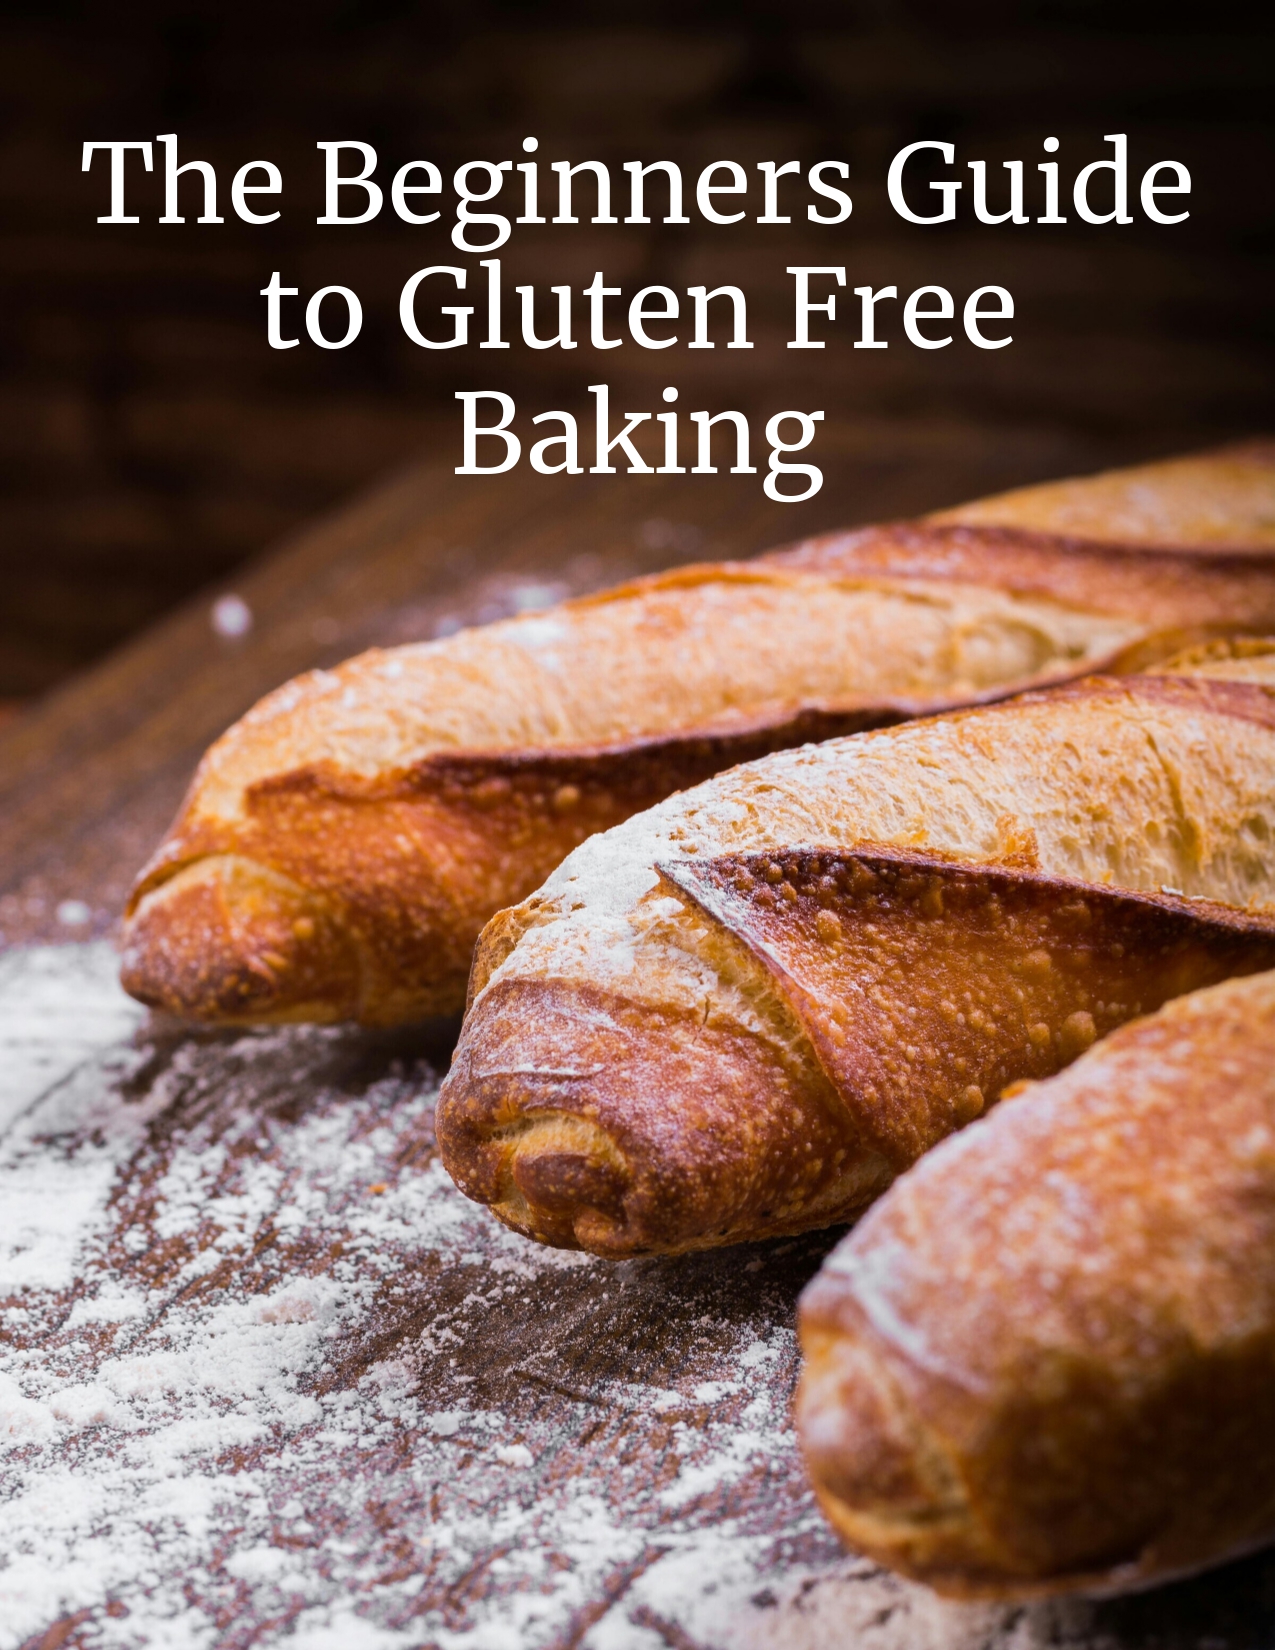 The Beginner’s Guide to Gluten-Free Baking